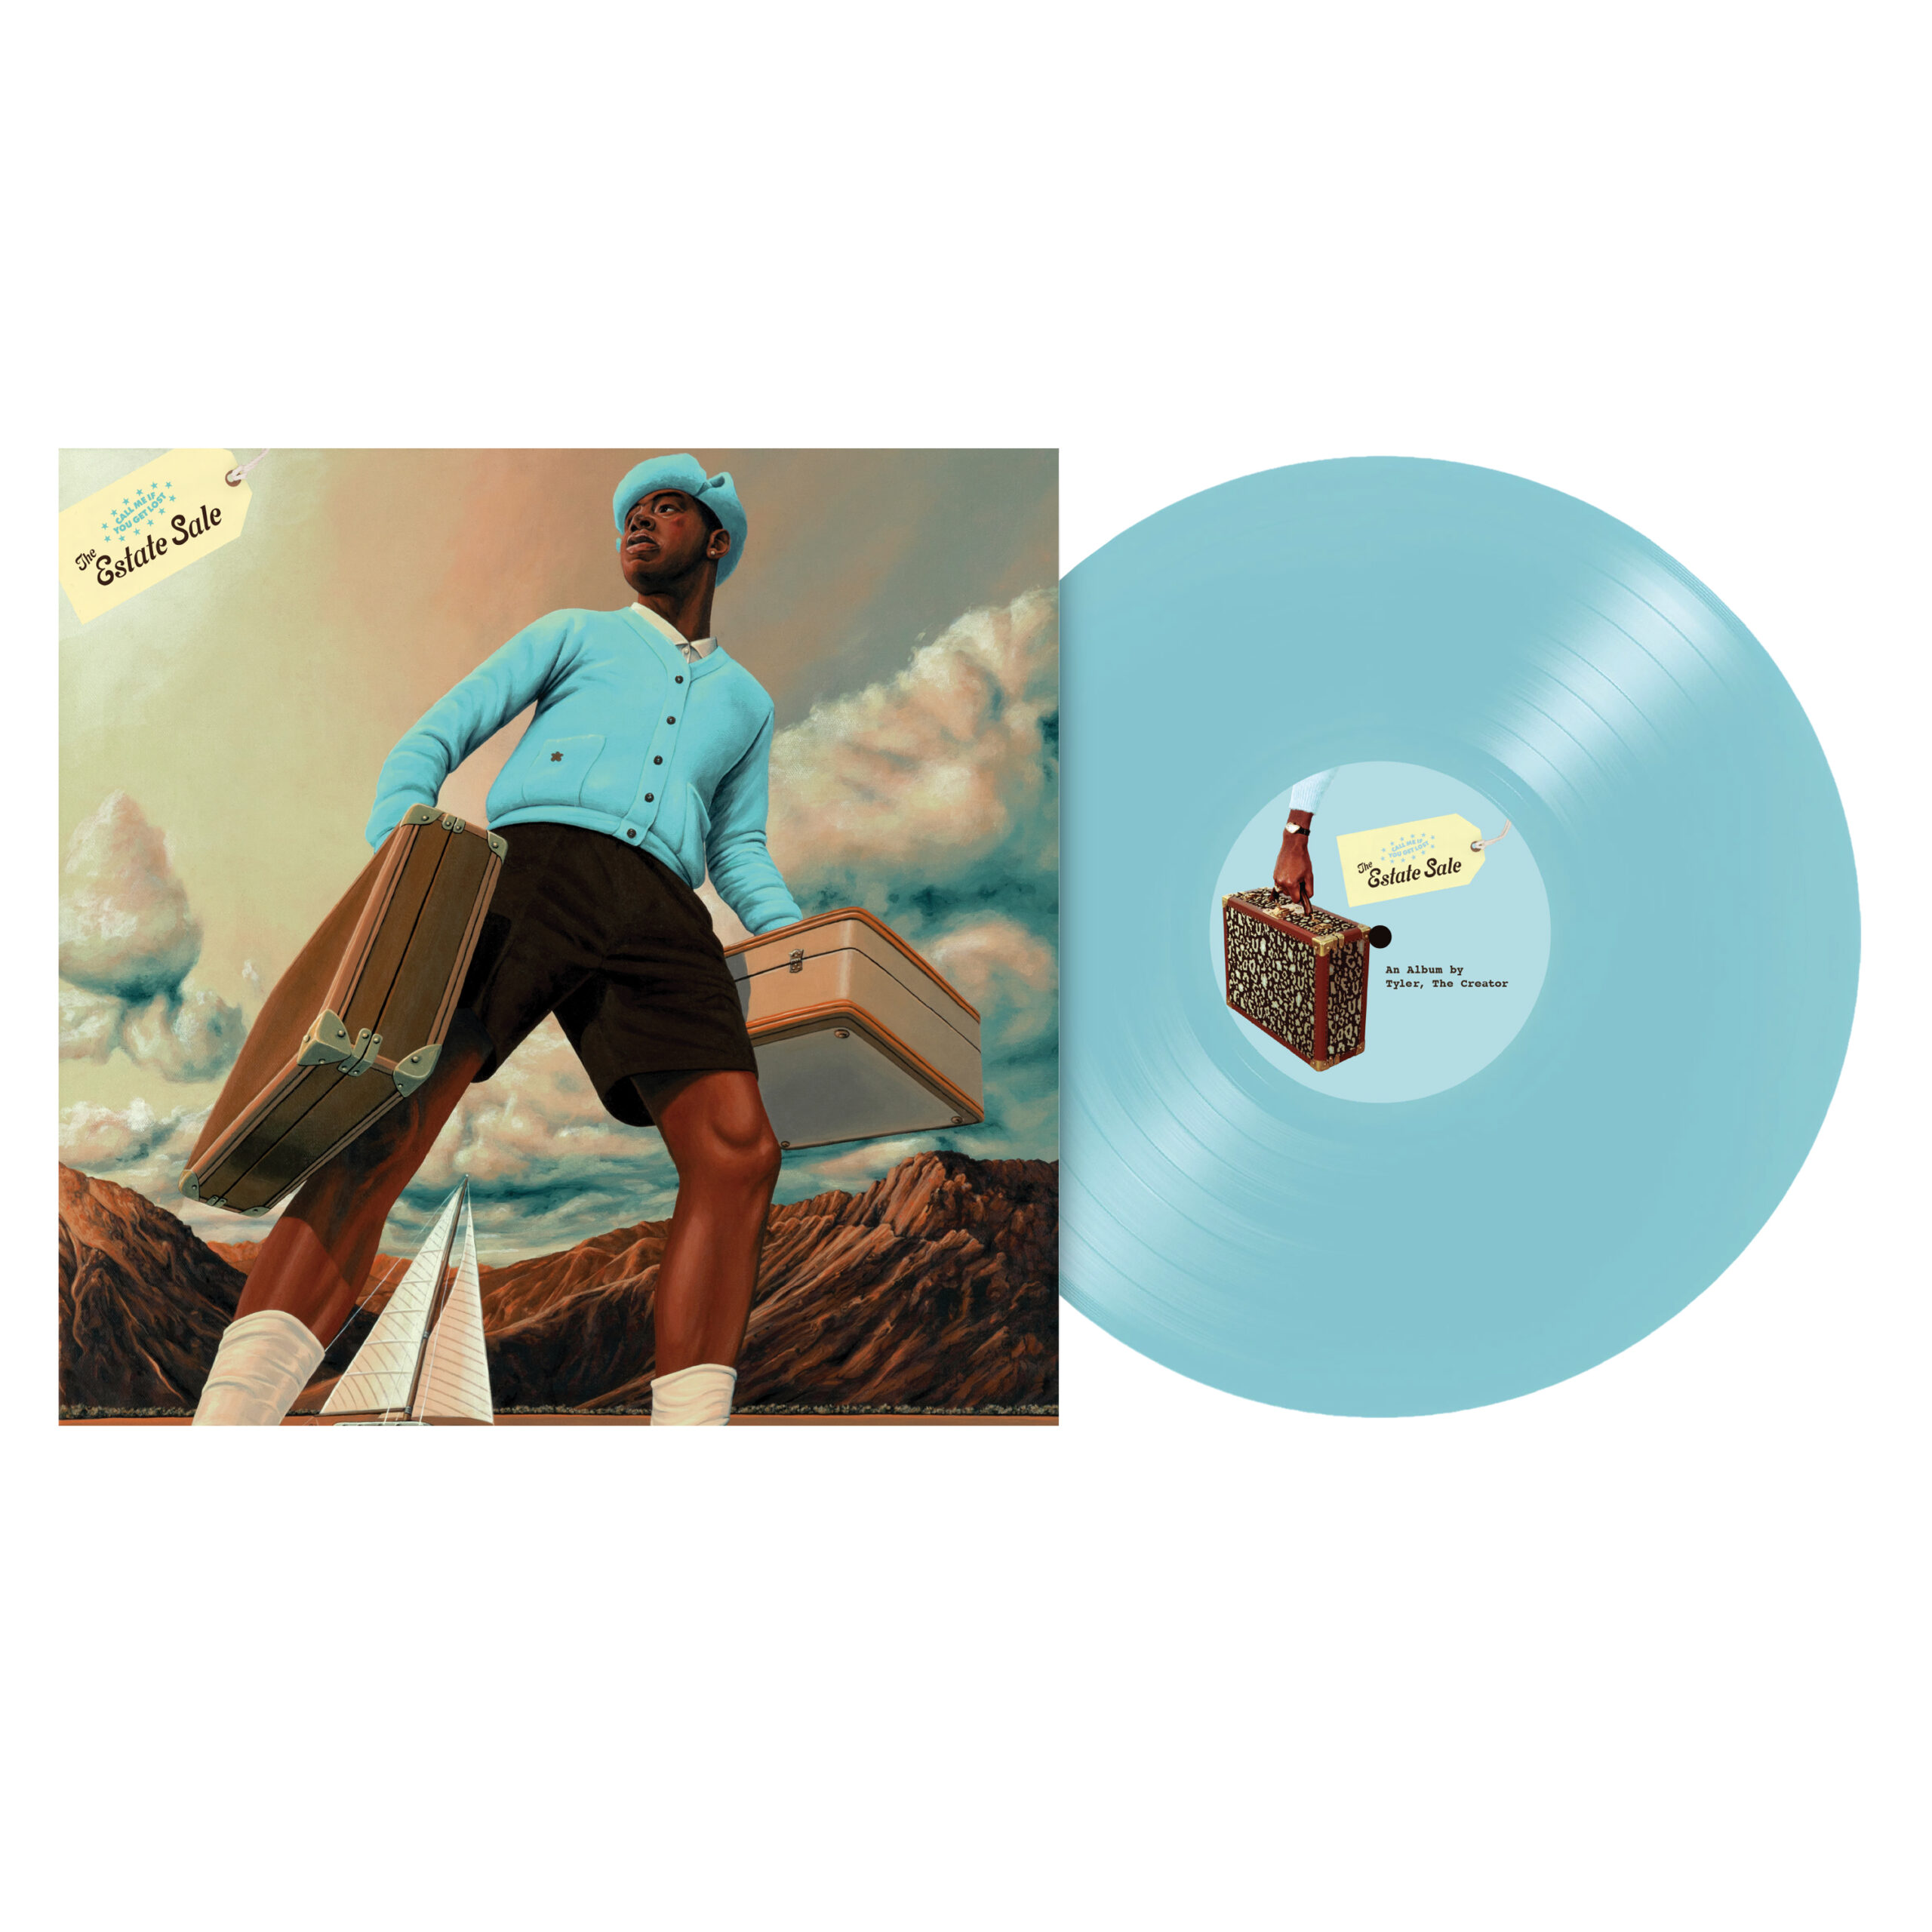 Tyler, The Creator – Call Me If You Get Lost: The Estate Sale